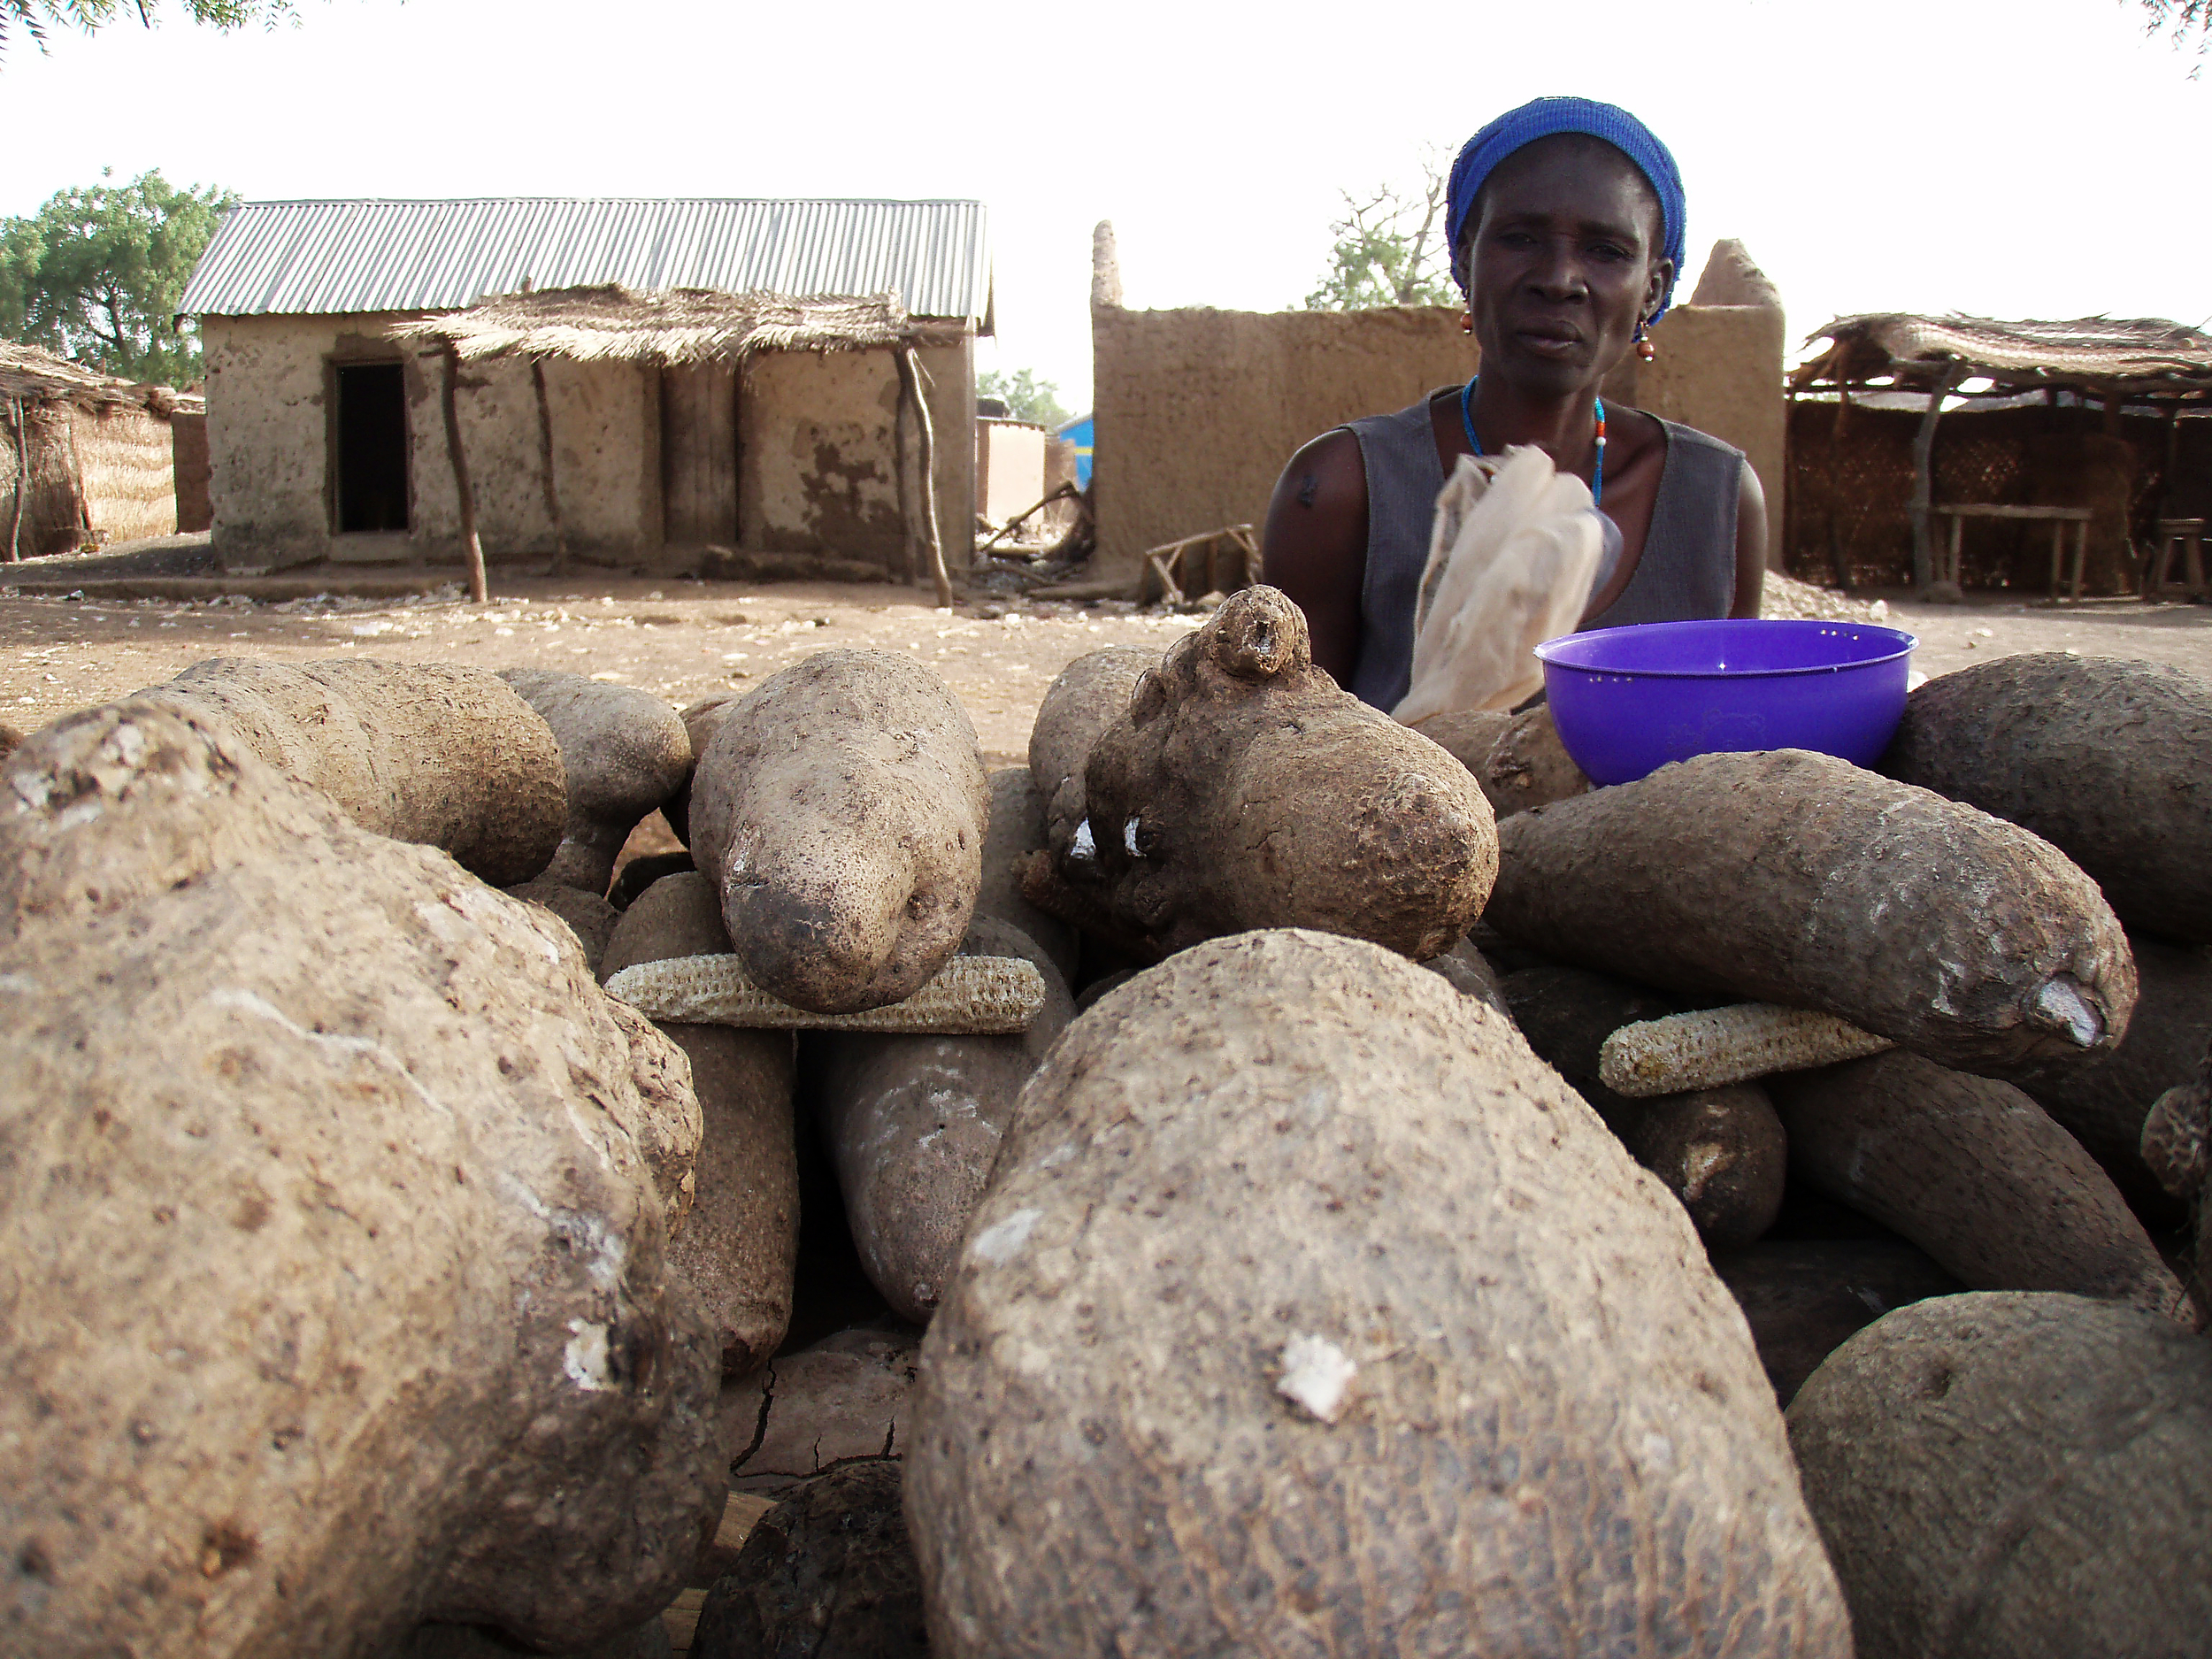  A woman sells yams along the highway in Sagbiebou, in northern Togo. 